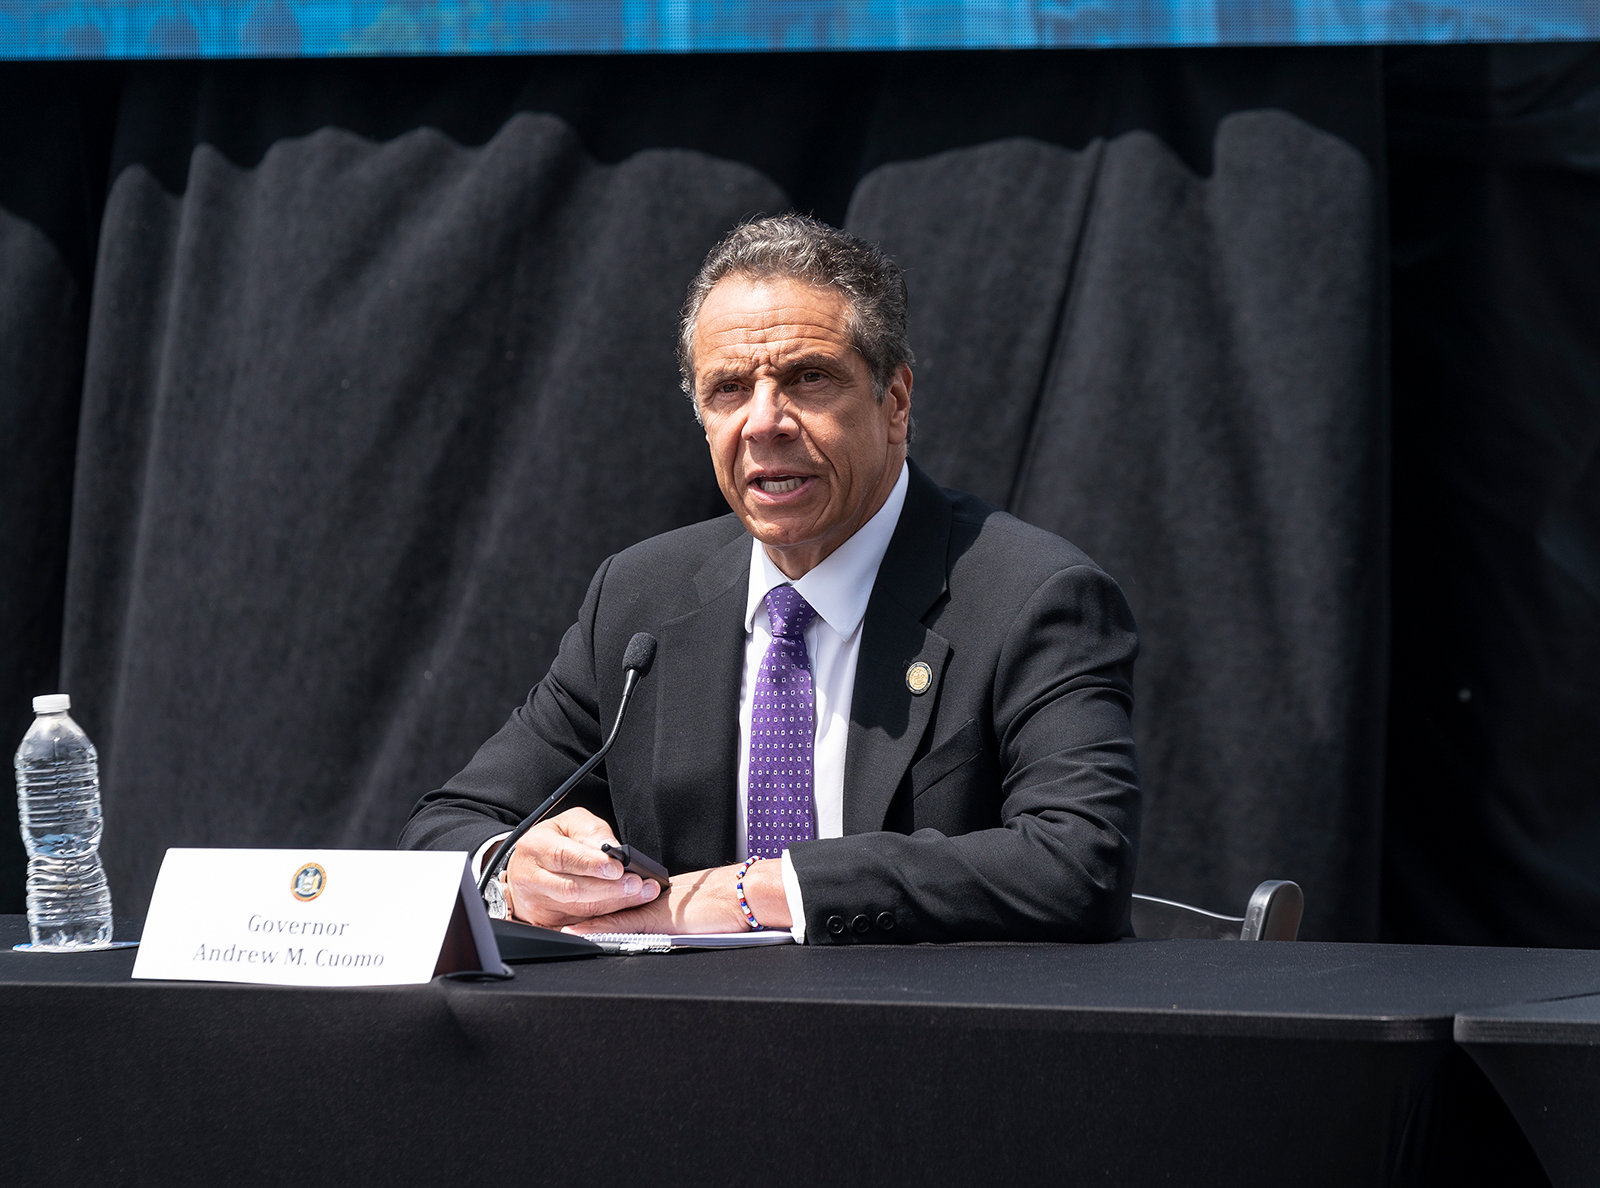 The governor of New York signed several laws on police reform